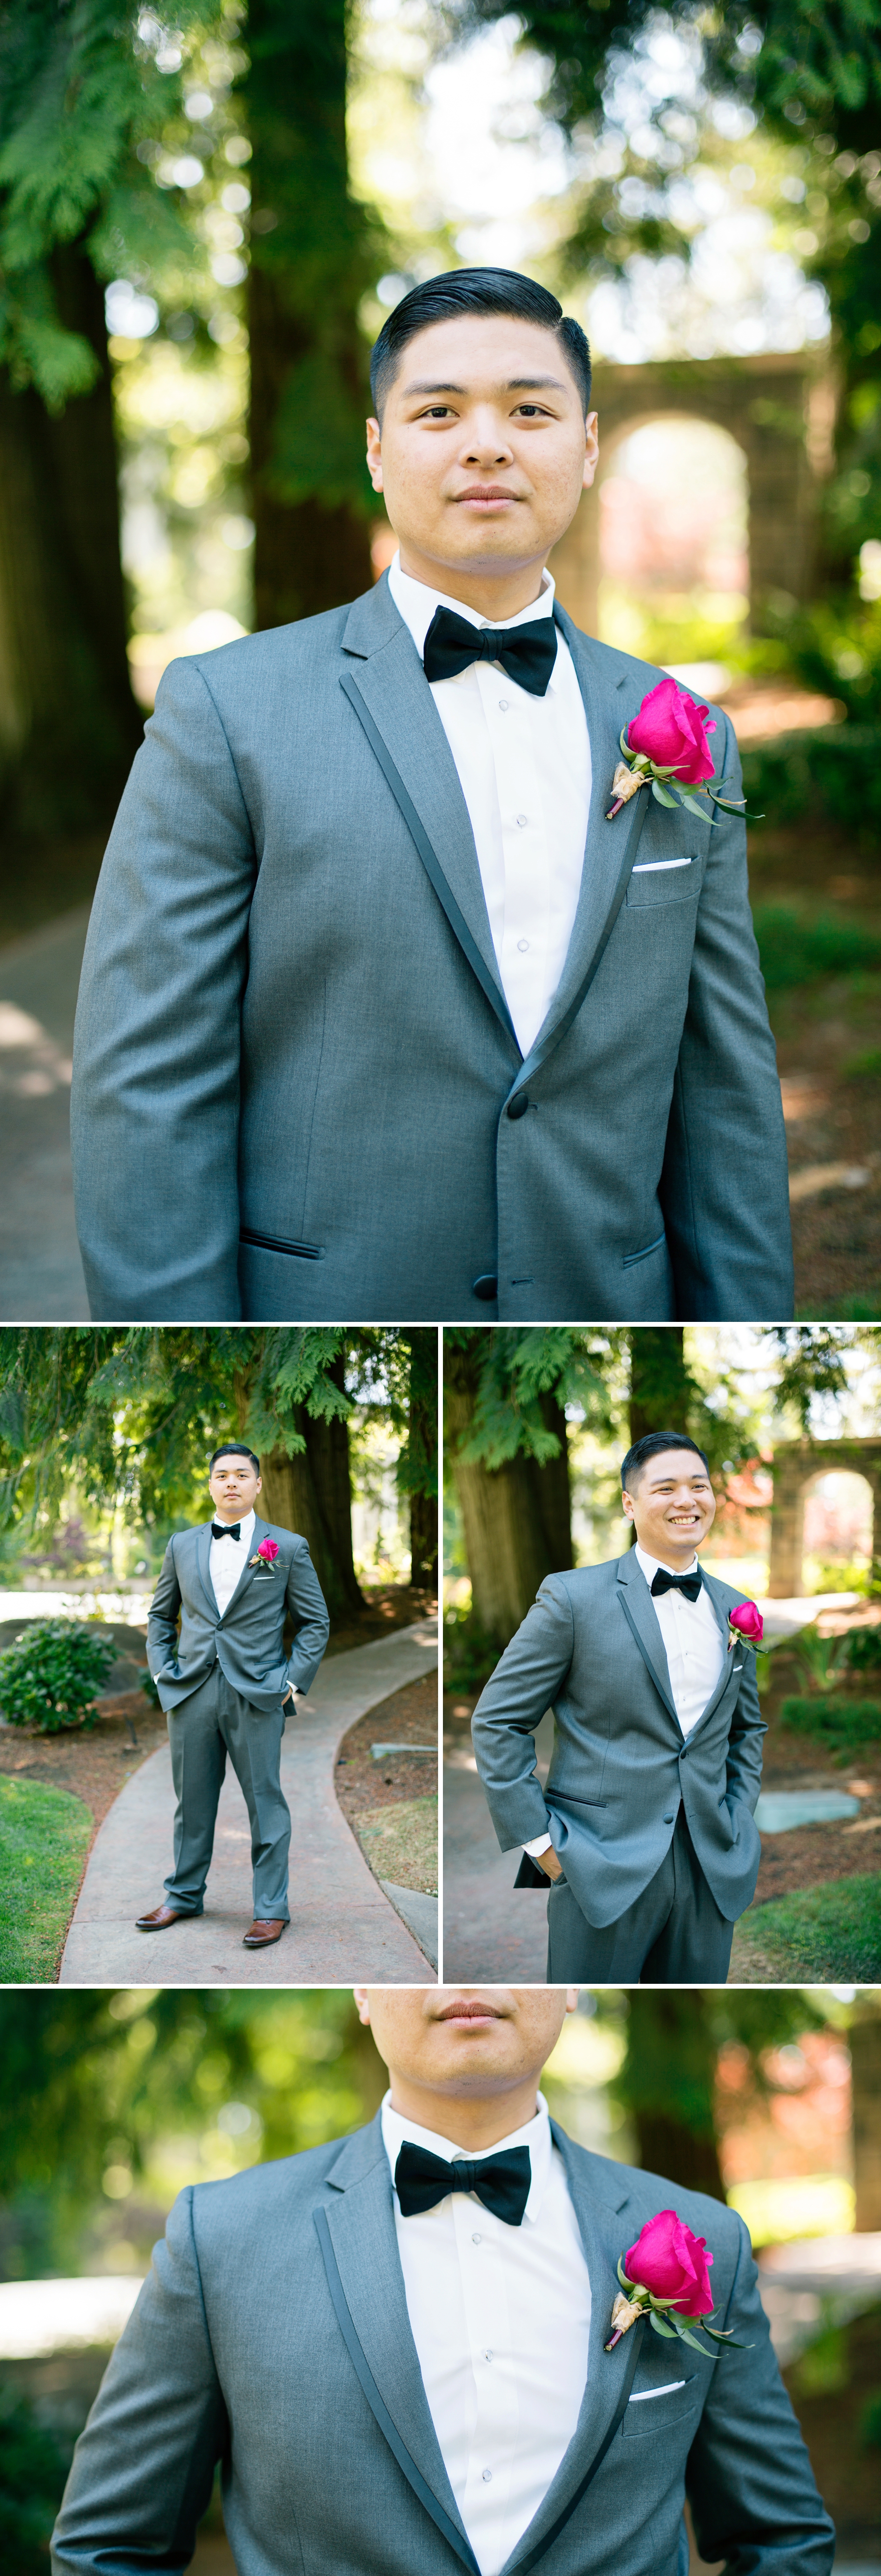 14-Groom-Portraits-Style-Suit-Gray-Details-Classic-Bow-Tie-Rock-Creek-Gardens-Seattle-Wedding-Photography-by-Betty-Elaine